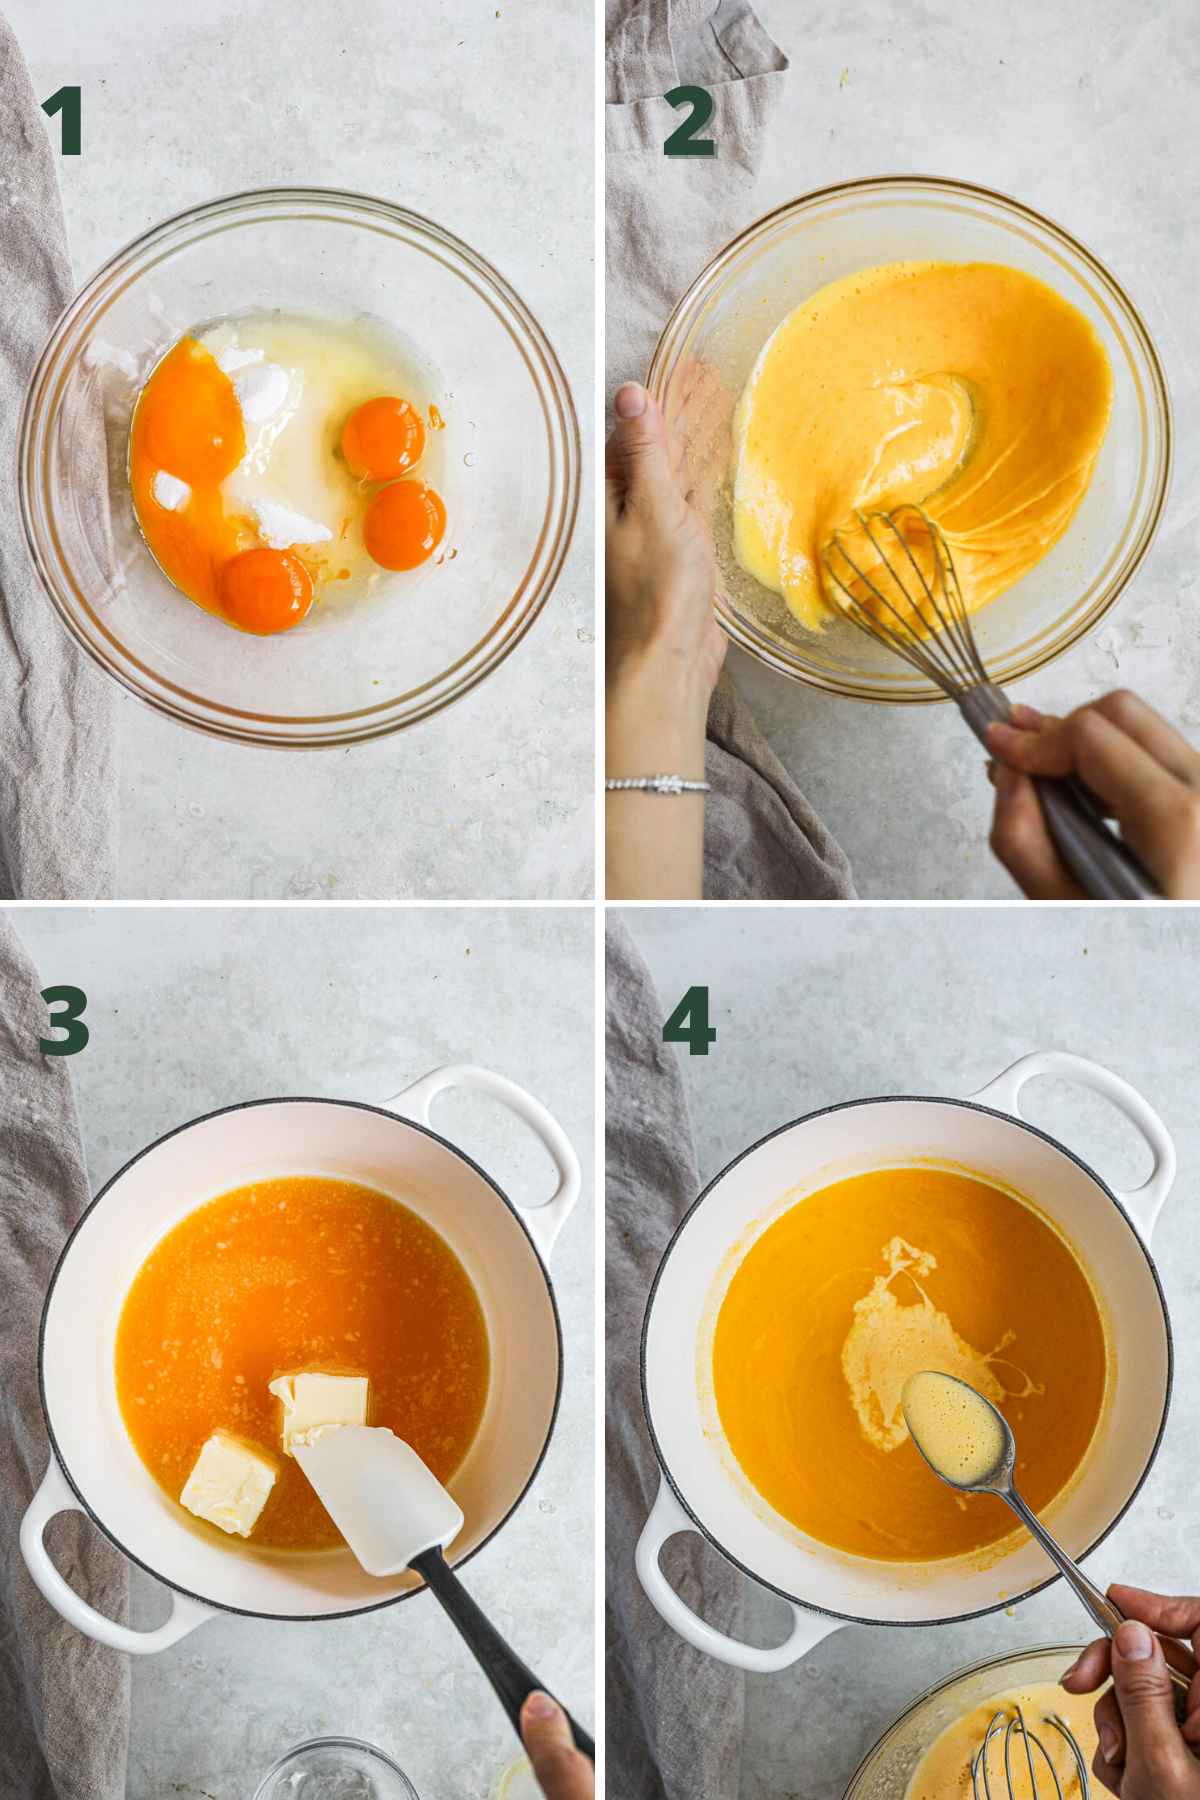 Steps to make passion fruit curd, whisking eggs, sugar, warming butter and passion fruit puree, adding some of the egg mixture to temper.